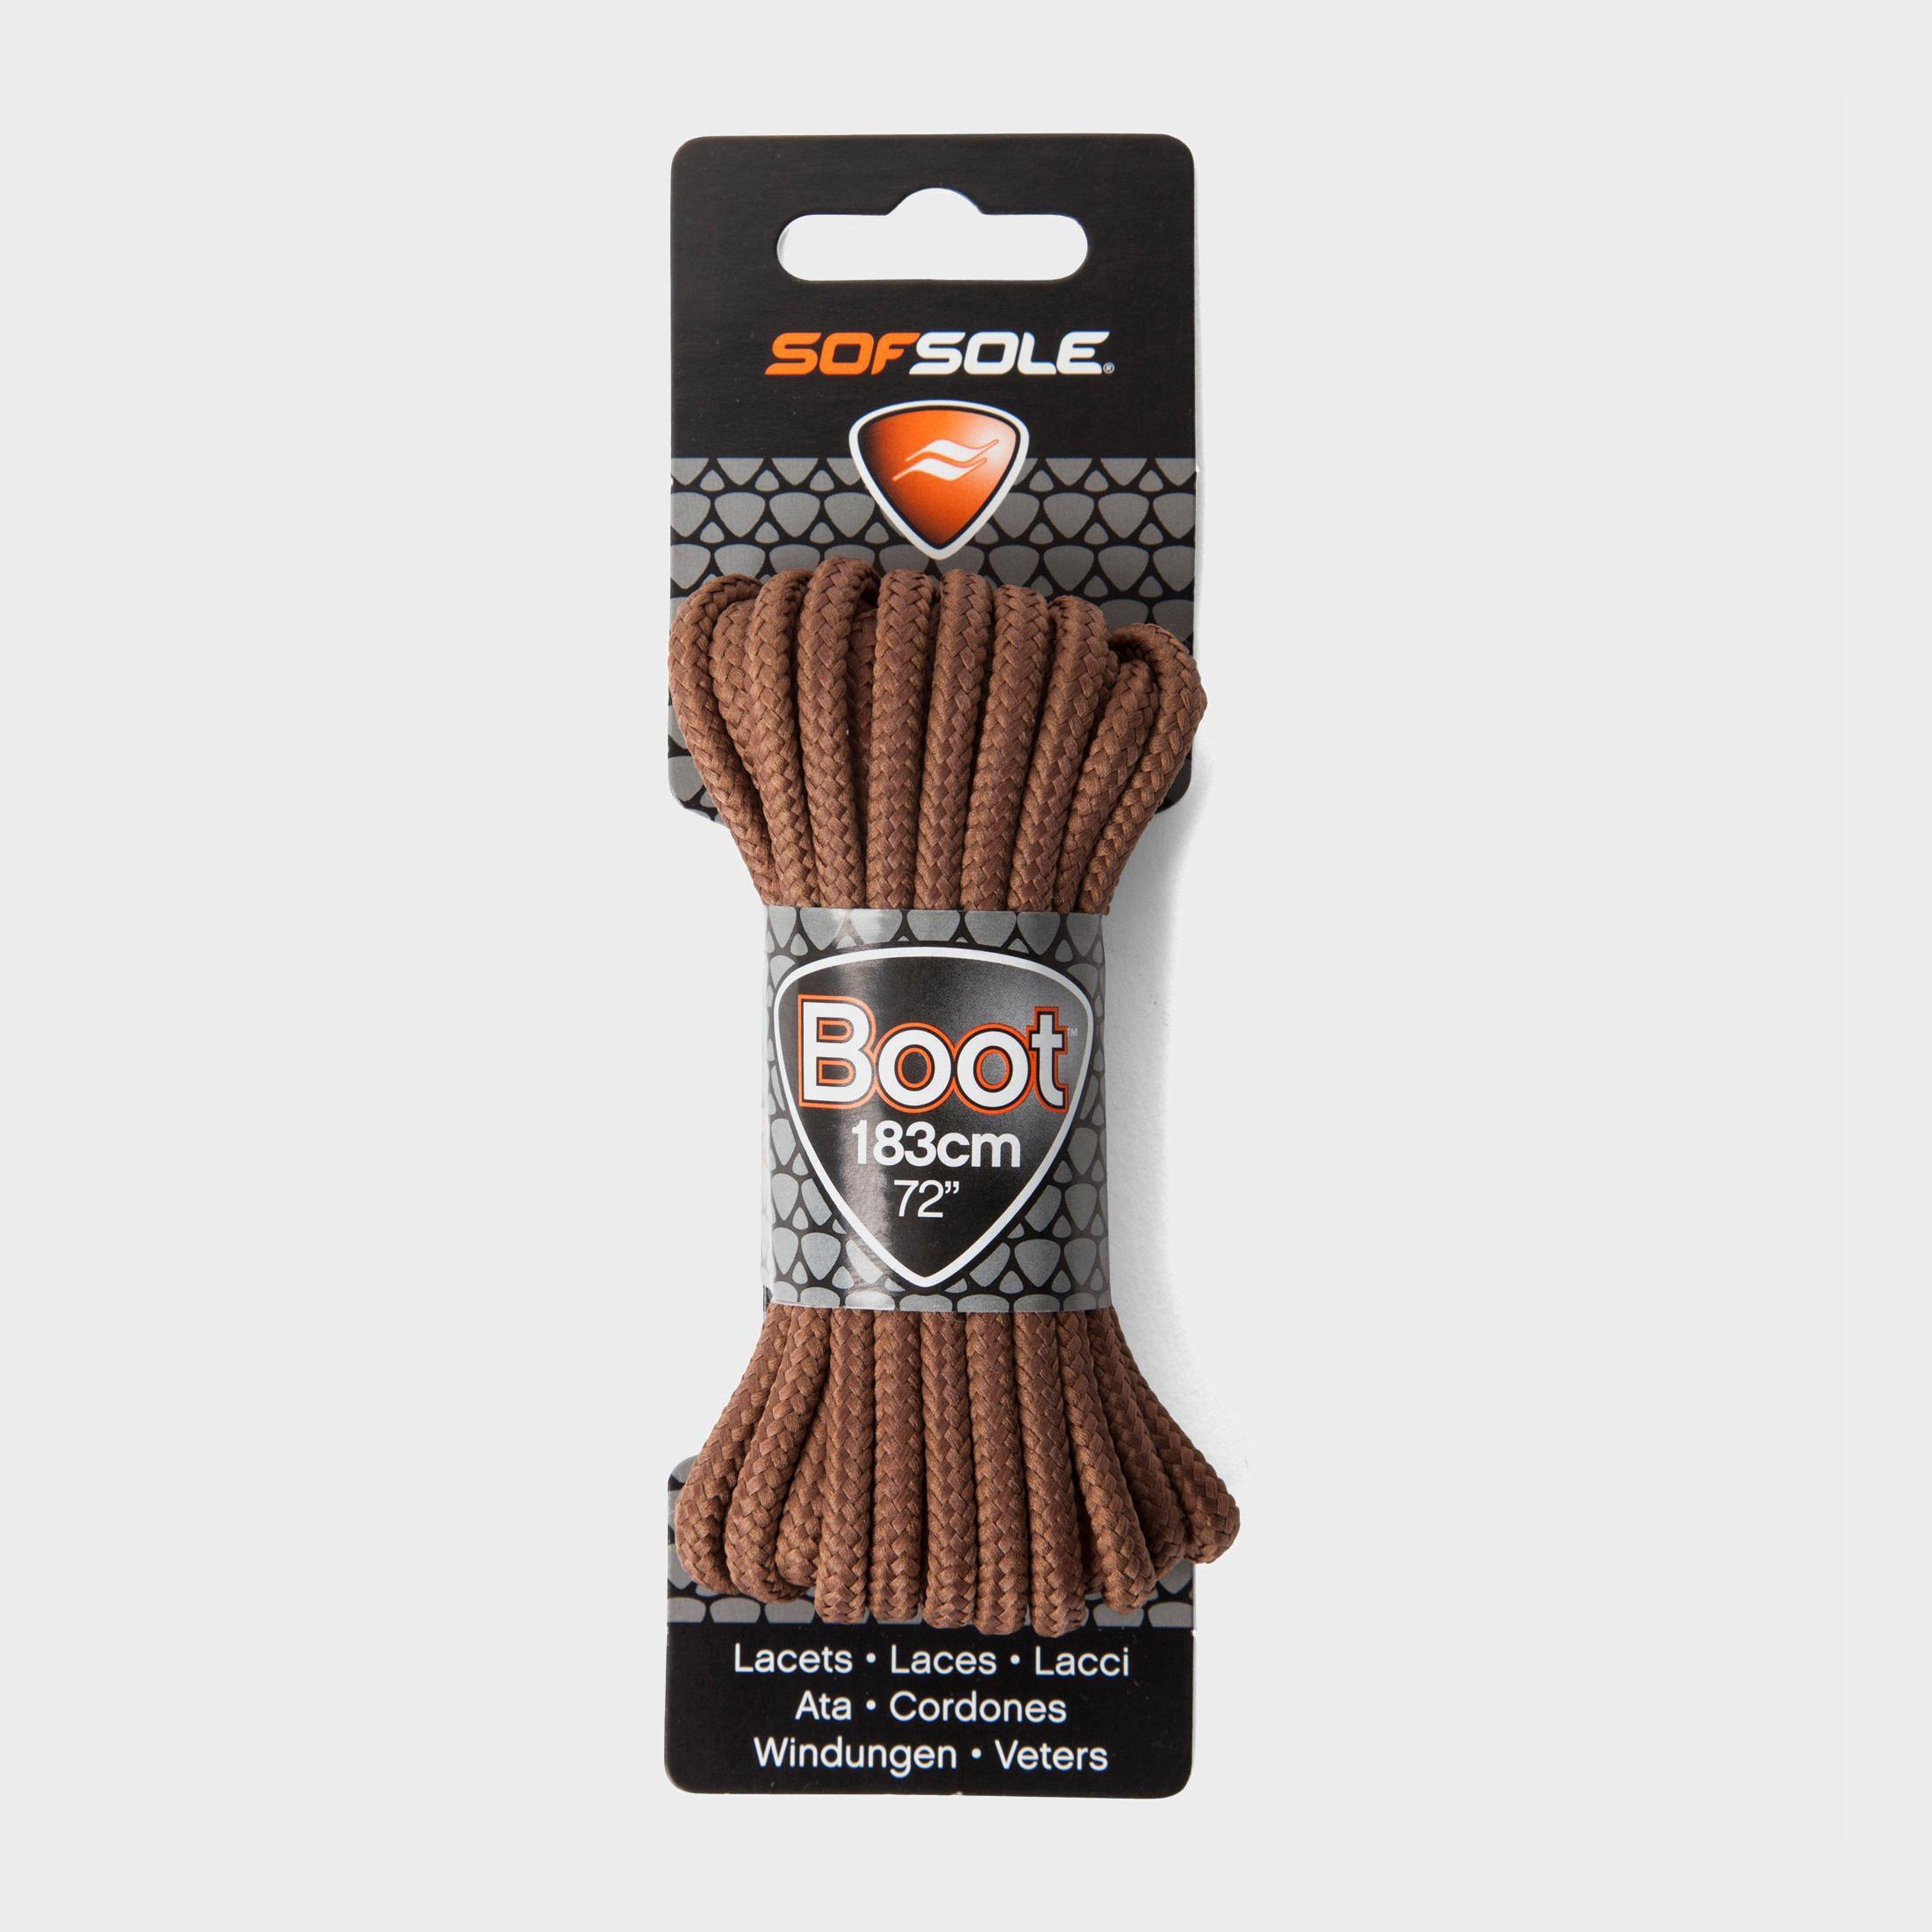 Sof Sole Wax Boot Laces - 183cm - Brown/brn  Brown/brn